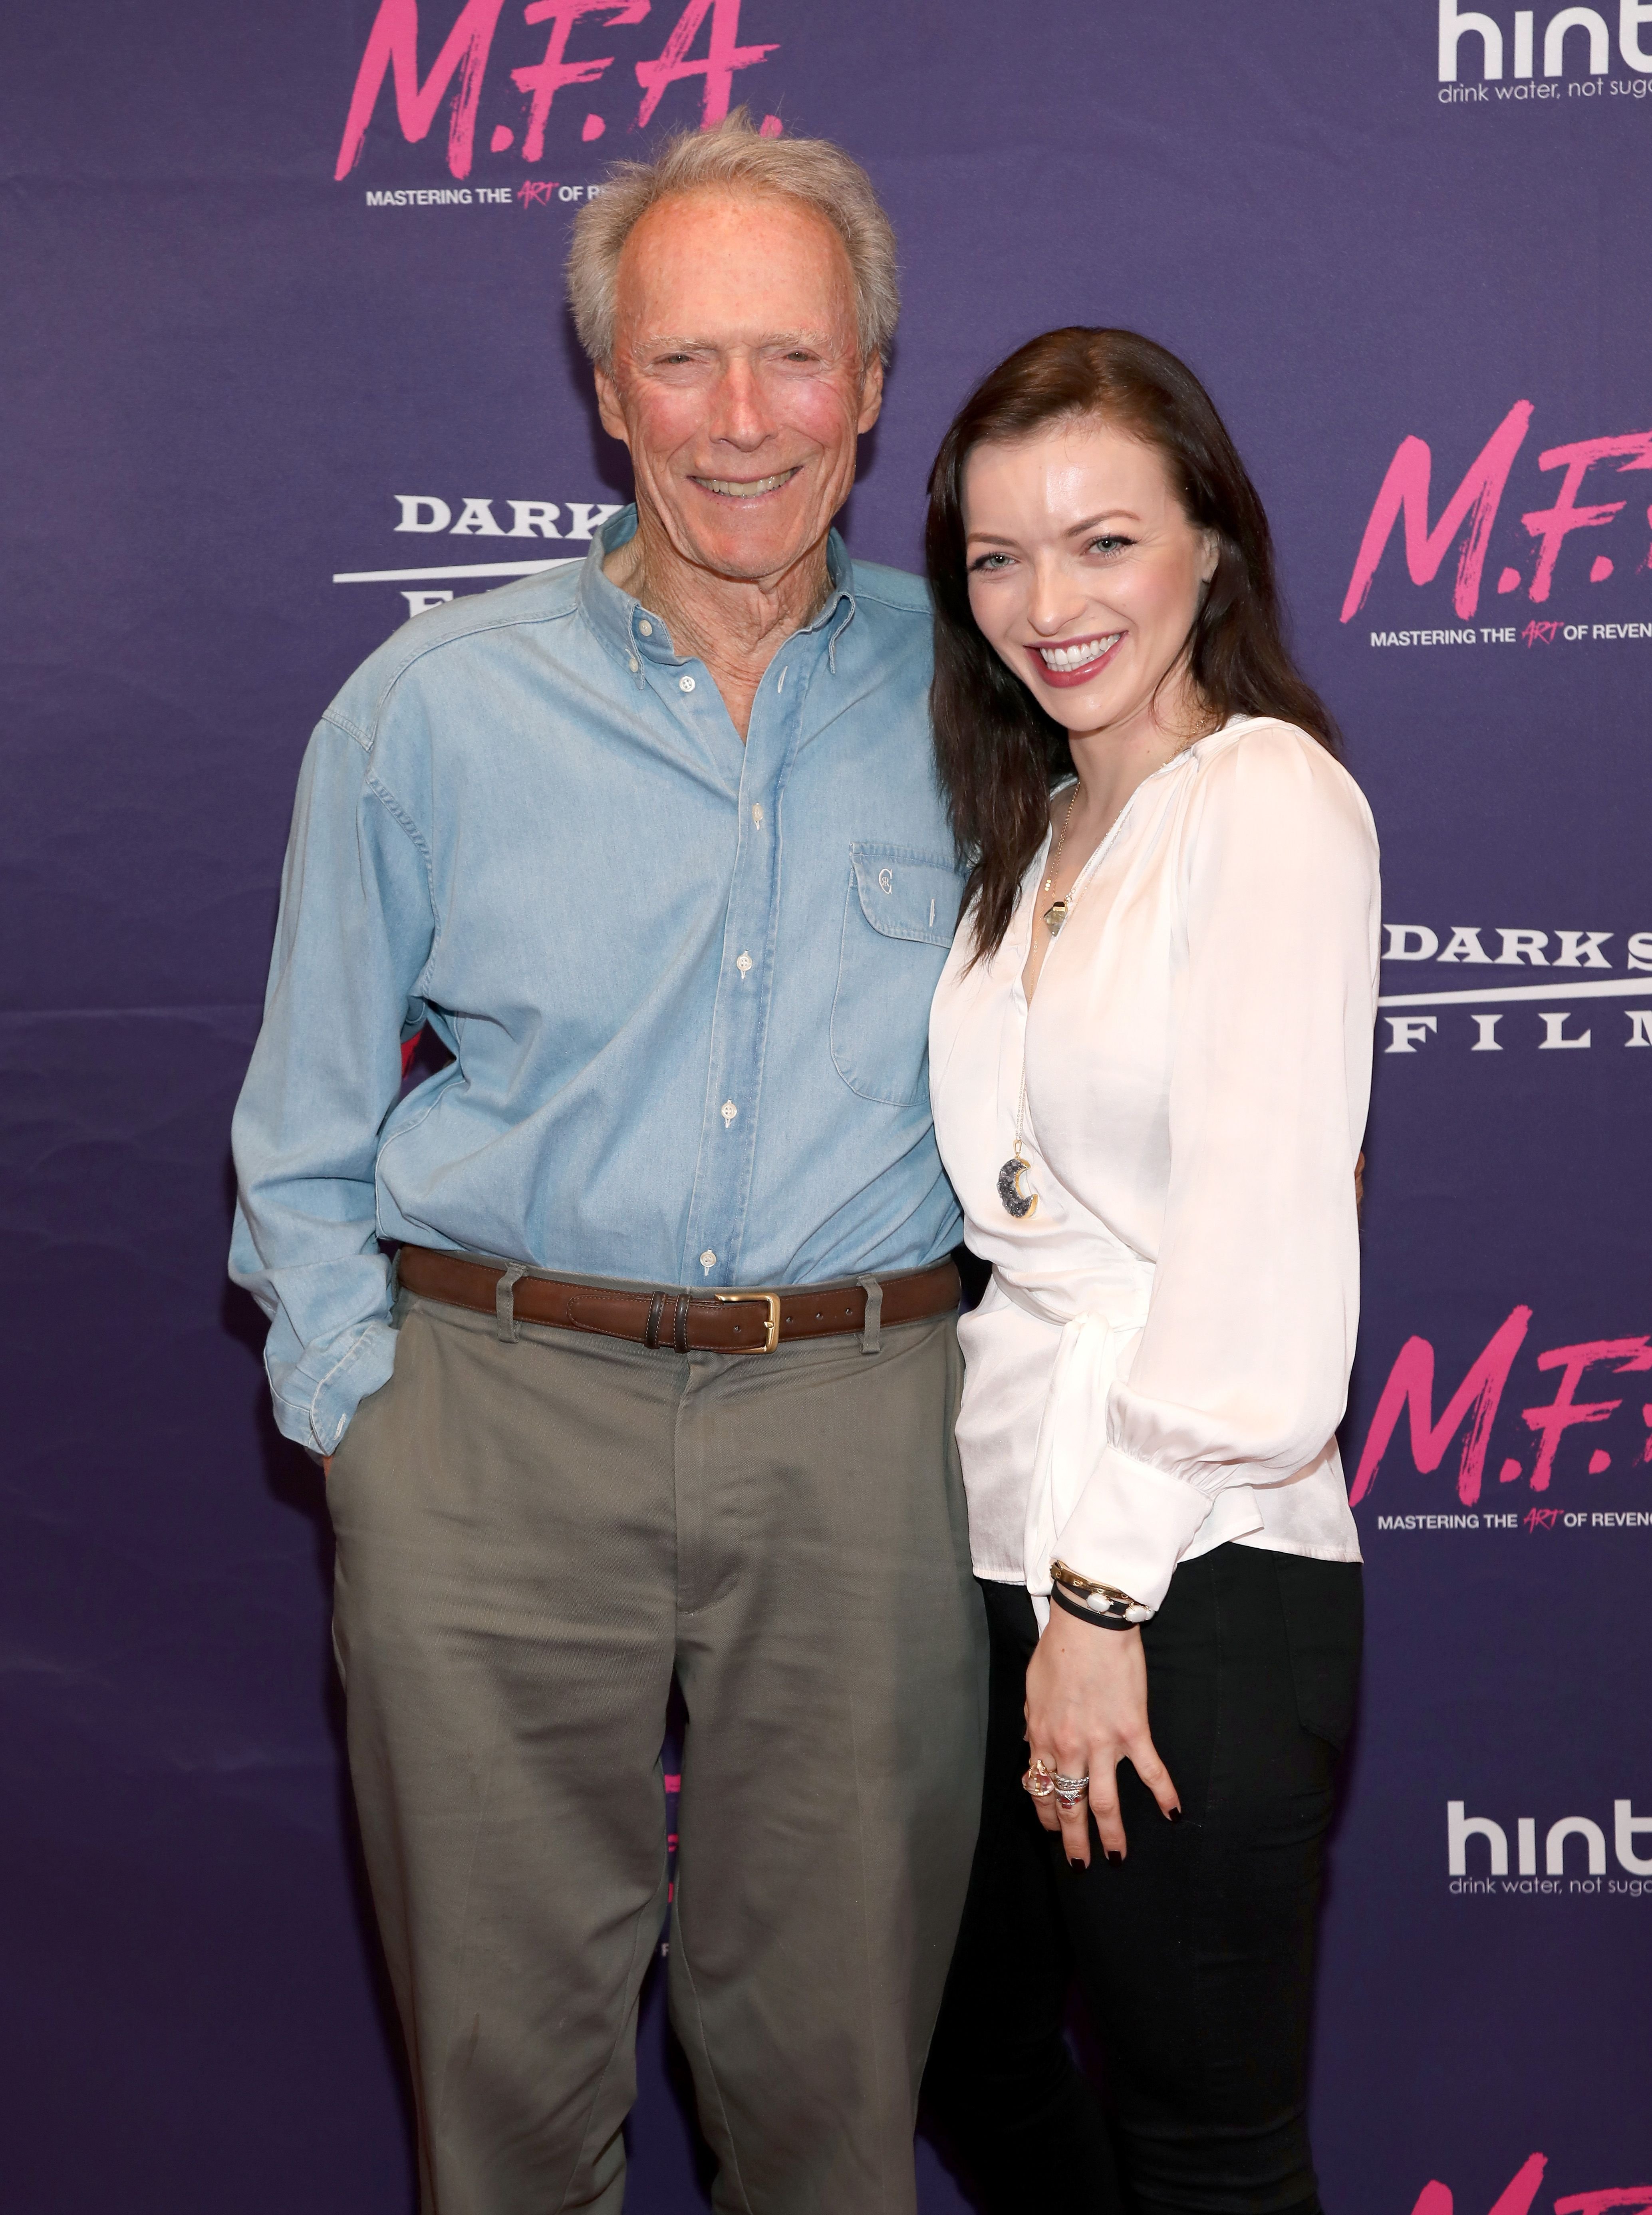 Clint Eastwood poses with his daughter/actress Francesca Eastwood at the Premiere Of Dark Sky Films' "M.F.A." at The London West Hollywood on October 2, 2017 | Photo Getty Images